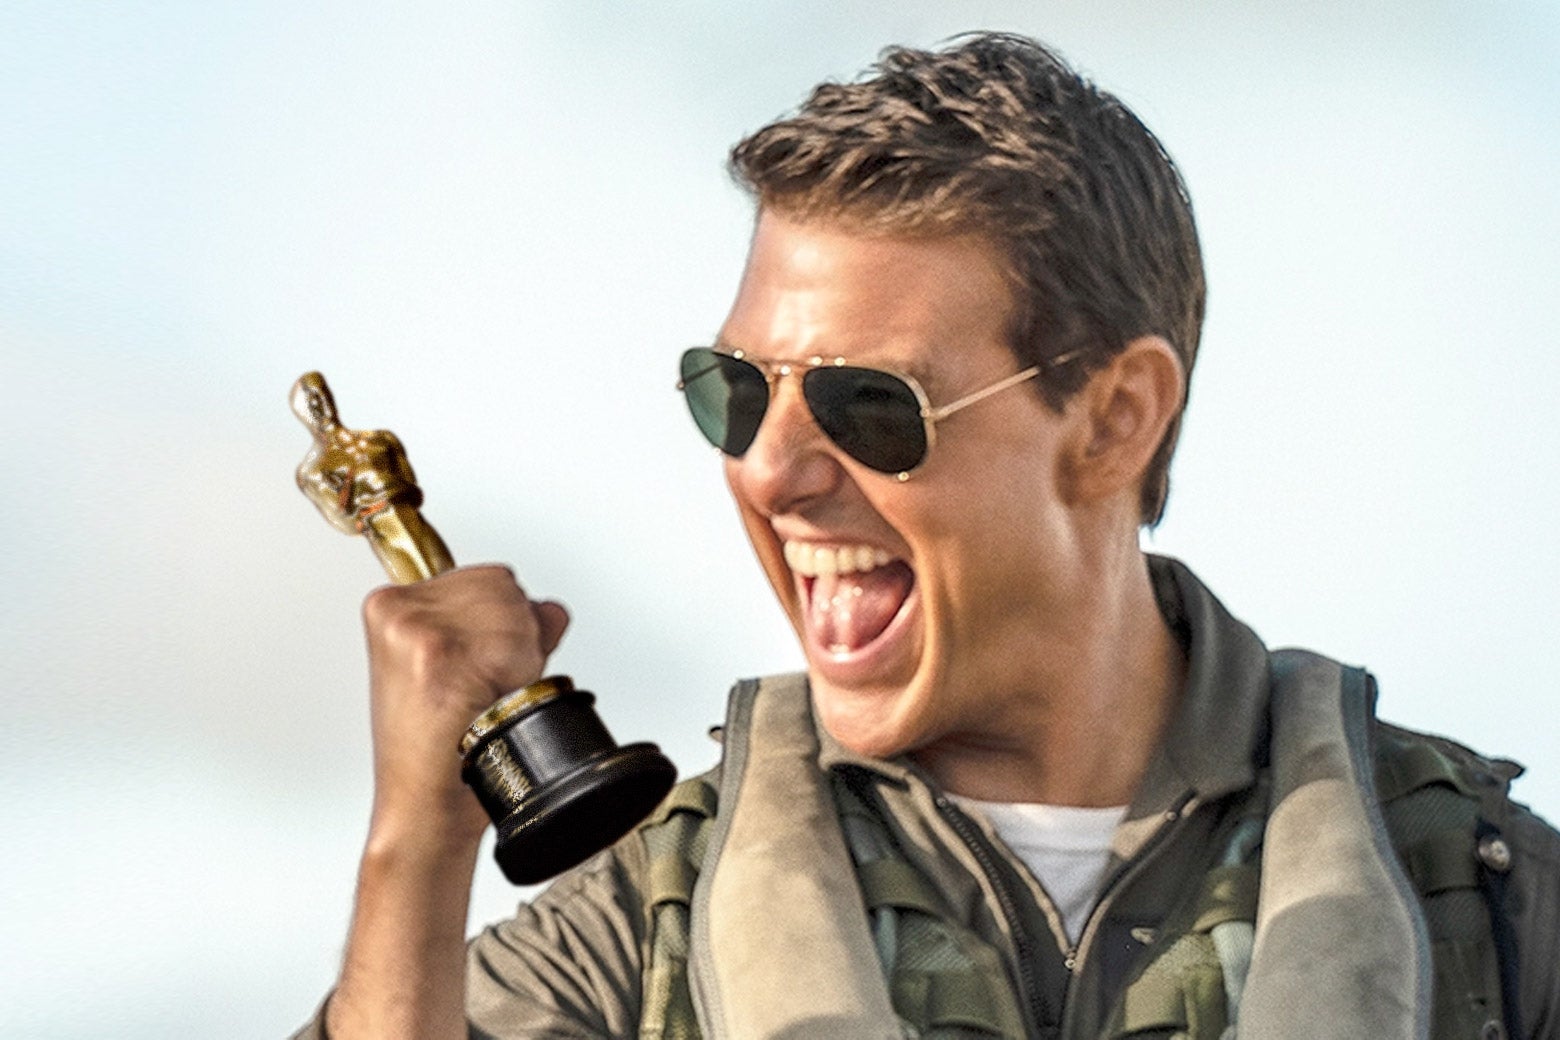 A still from Top Gun: Maverick shows Tom Cruise in aviators and a flight jacket, pumping his right fist. In that fist is photoshopped an Oscar.